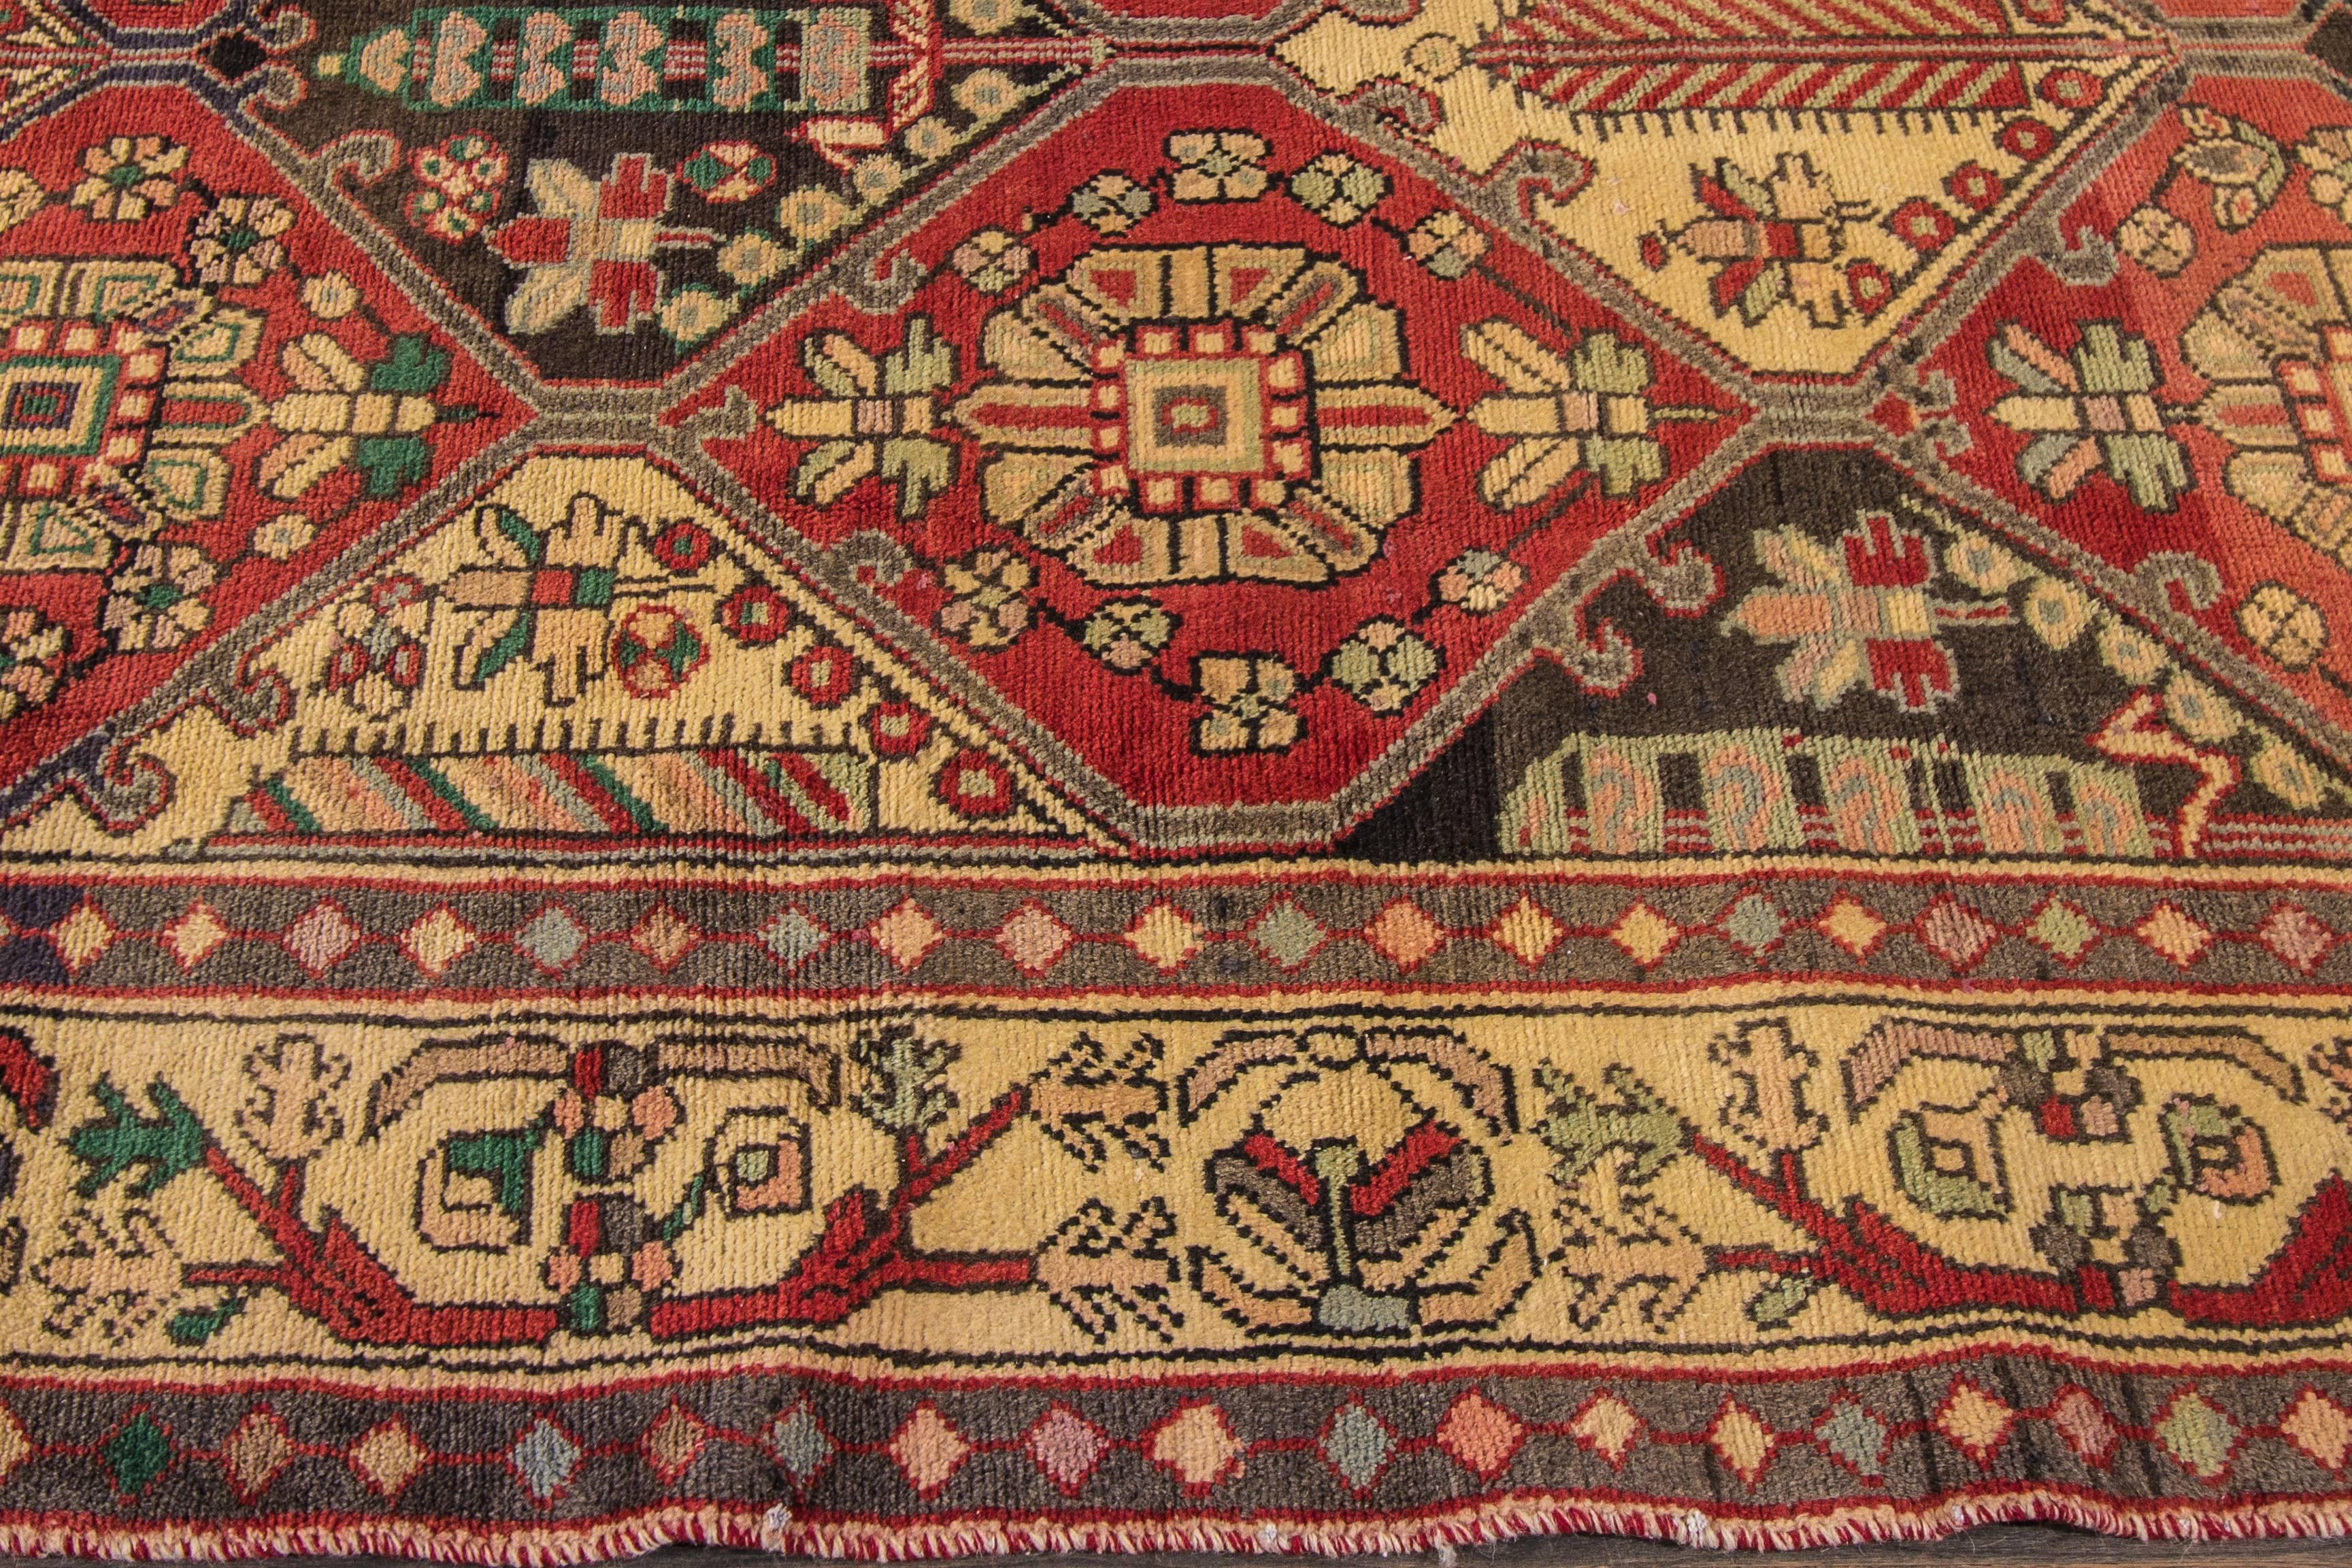 Measures: 5.7” x 10.10”.
While originally woven by nomadic Bakhtiari, most authentic Bakhtiari rugs are woven in Bakhtiari settled communities in west central Iran southwest of Isfahan, Chahar Mahaal and Bakhtiari and parts of the provinces of